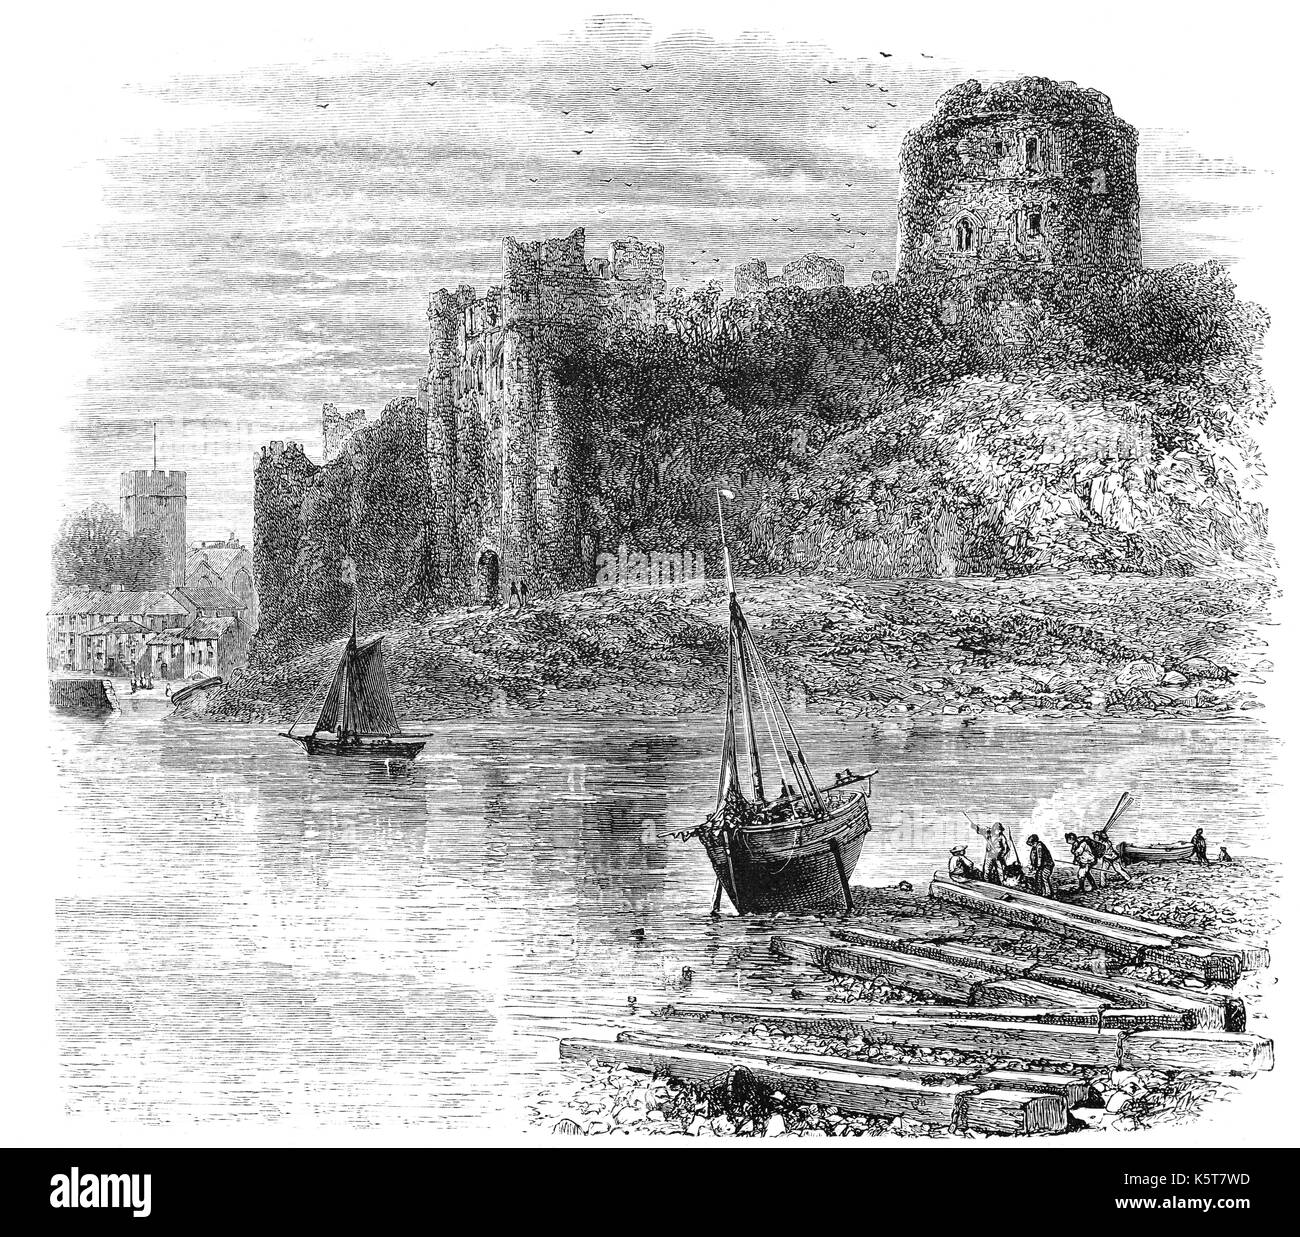 1870: Arnulf of Montgomery built the first Pembroke Castle in 1093 when he fortified the promontory beside the Pembroke River during the Norman invasion of Wales. A century later the castle was given to William Marshal who became one of the most powerful men in 12th-century Britain. He rebuilt Pembroke Castle in stone creating most of the structure that remains behind ths small ship repair yard. Pembrokeshire, South Wales. Stock Photo